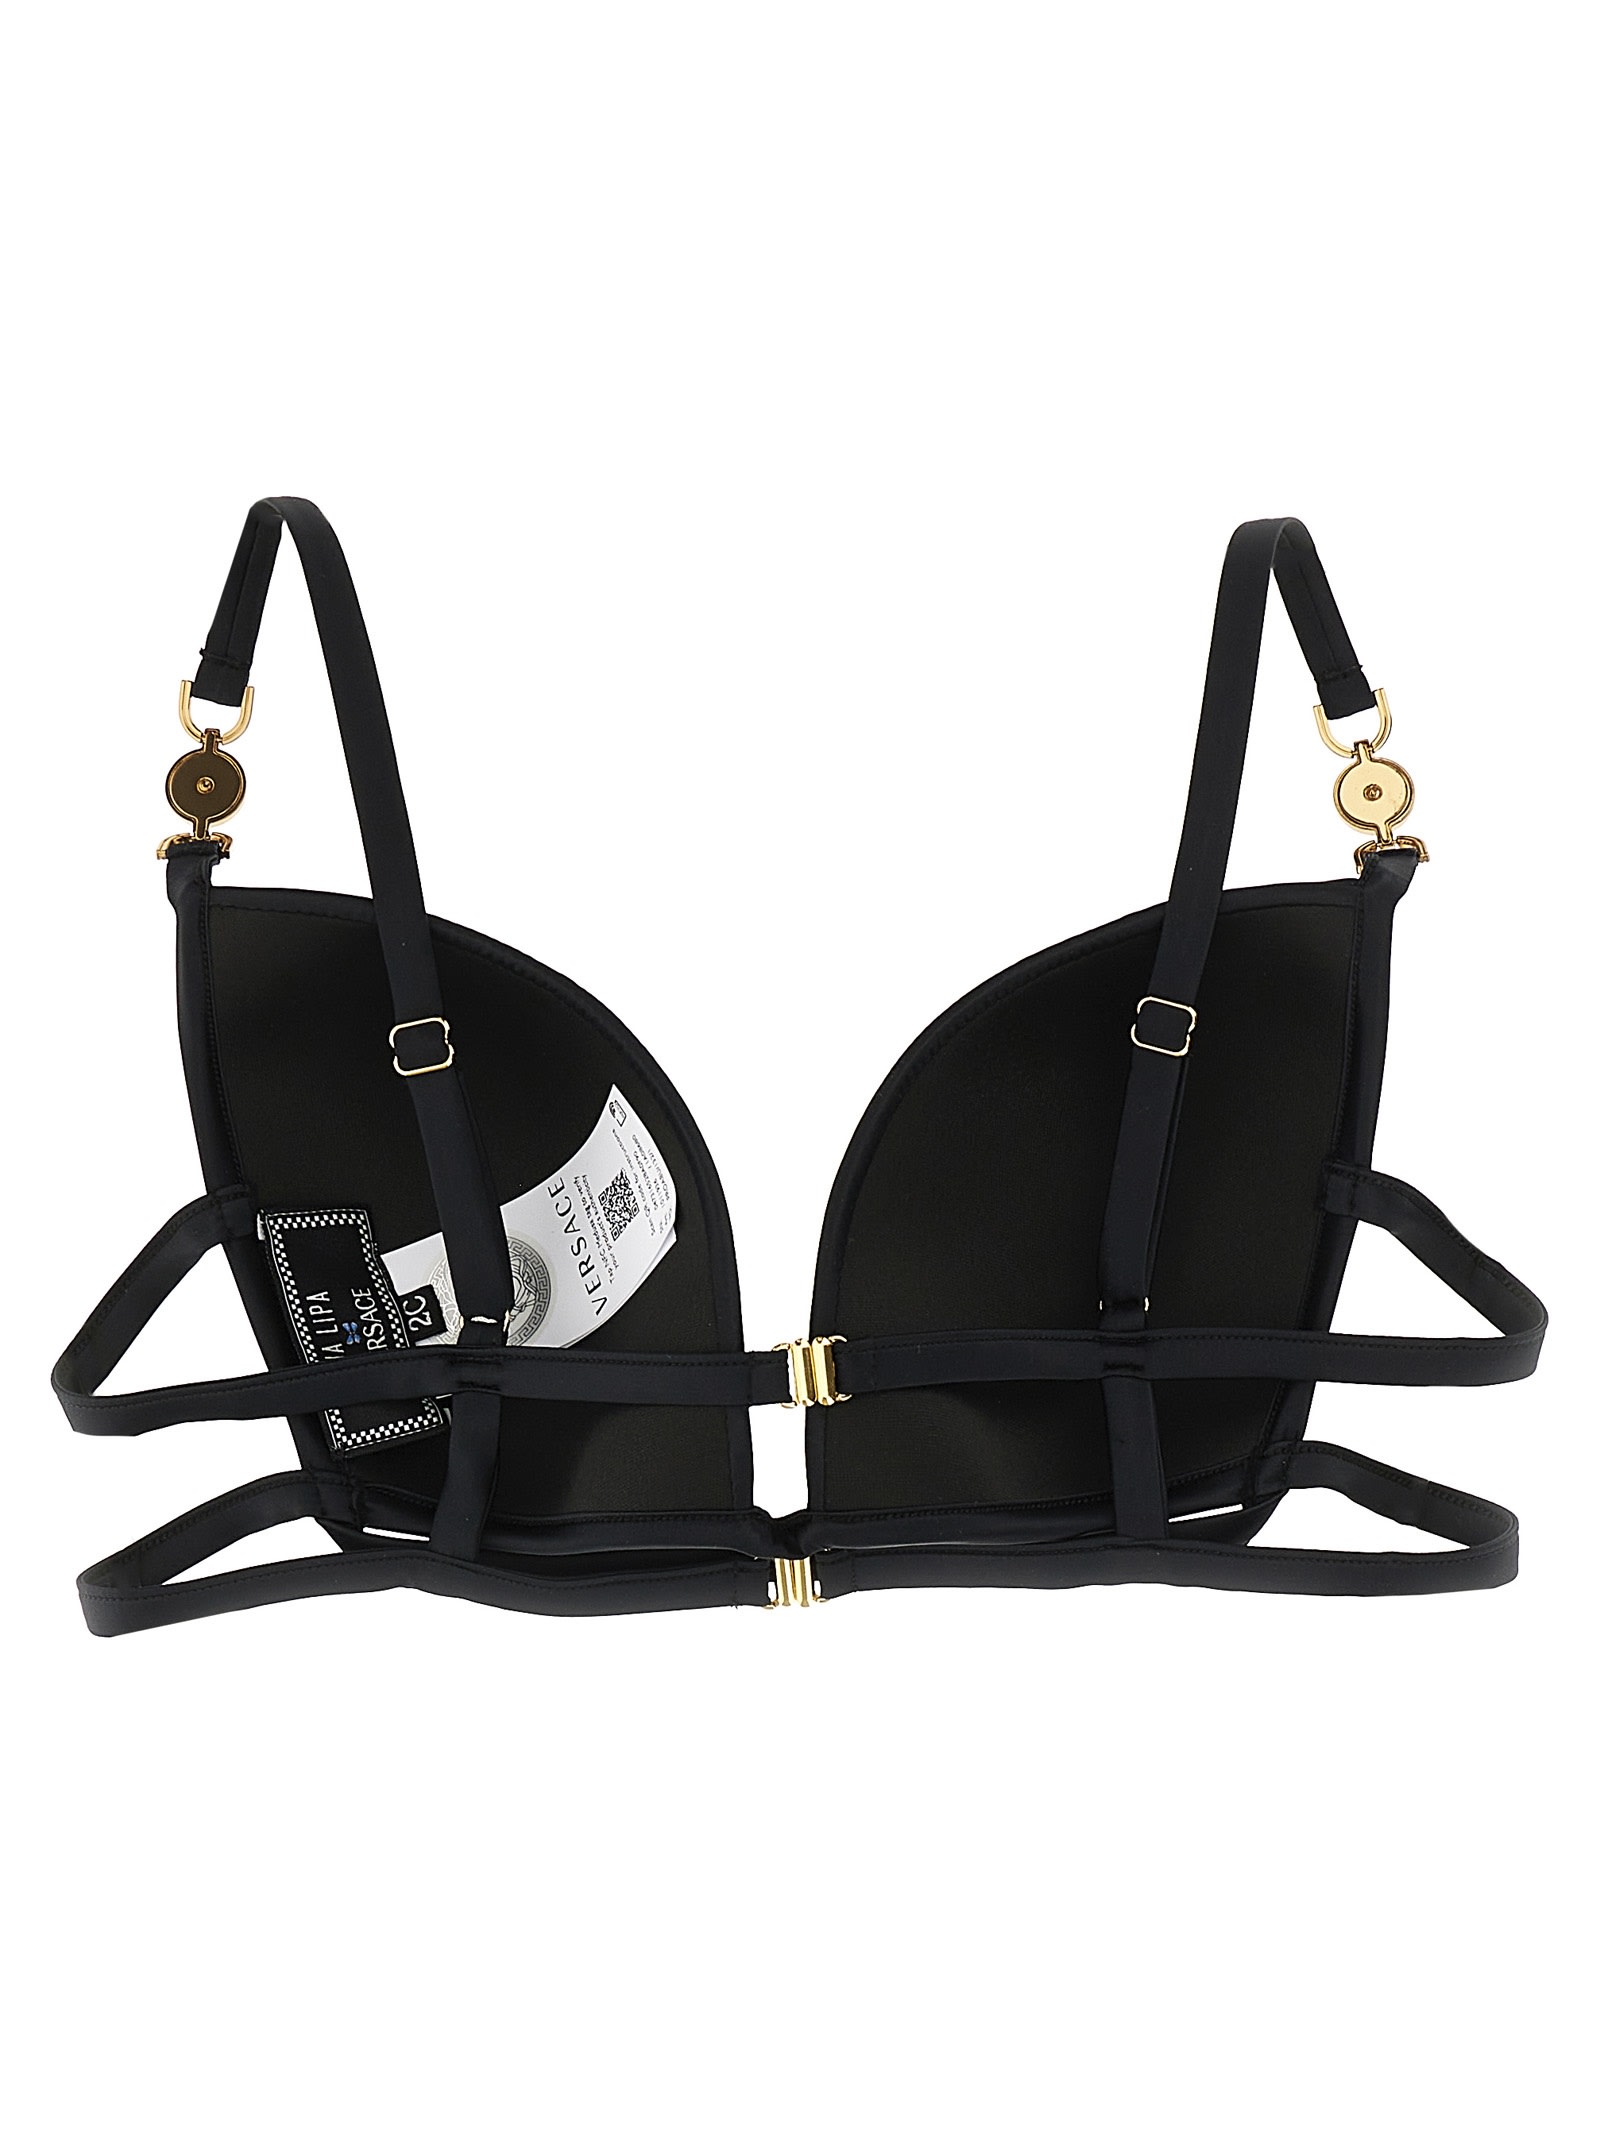 Alexander Wang Sports Bra With Crystal-Studded Logo Trims in Black